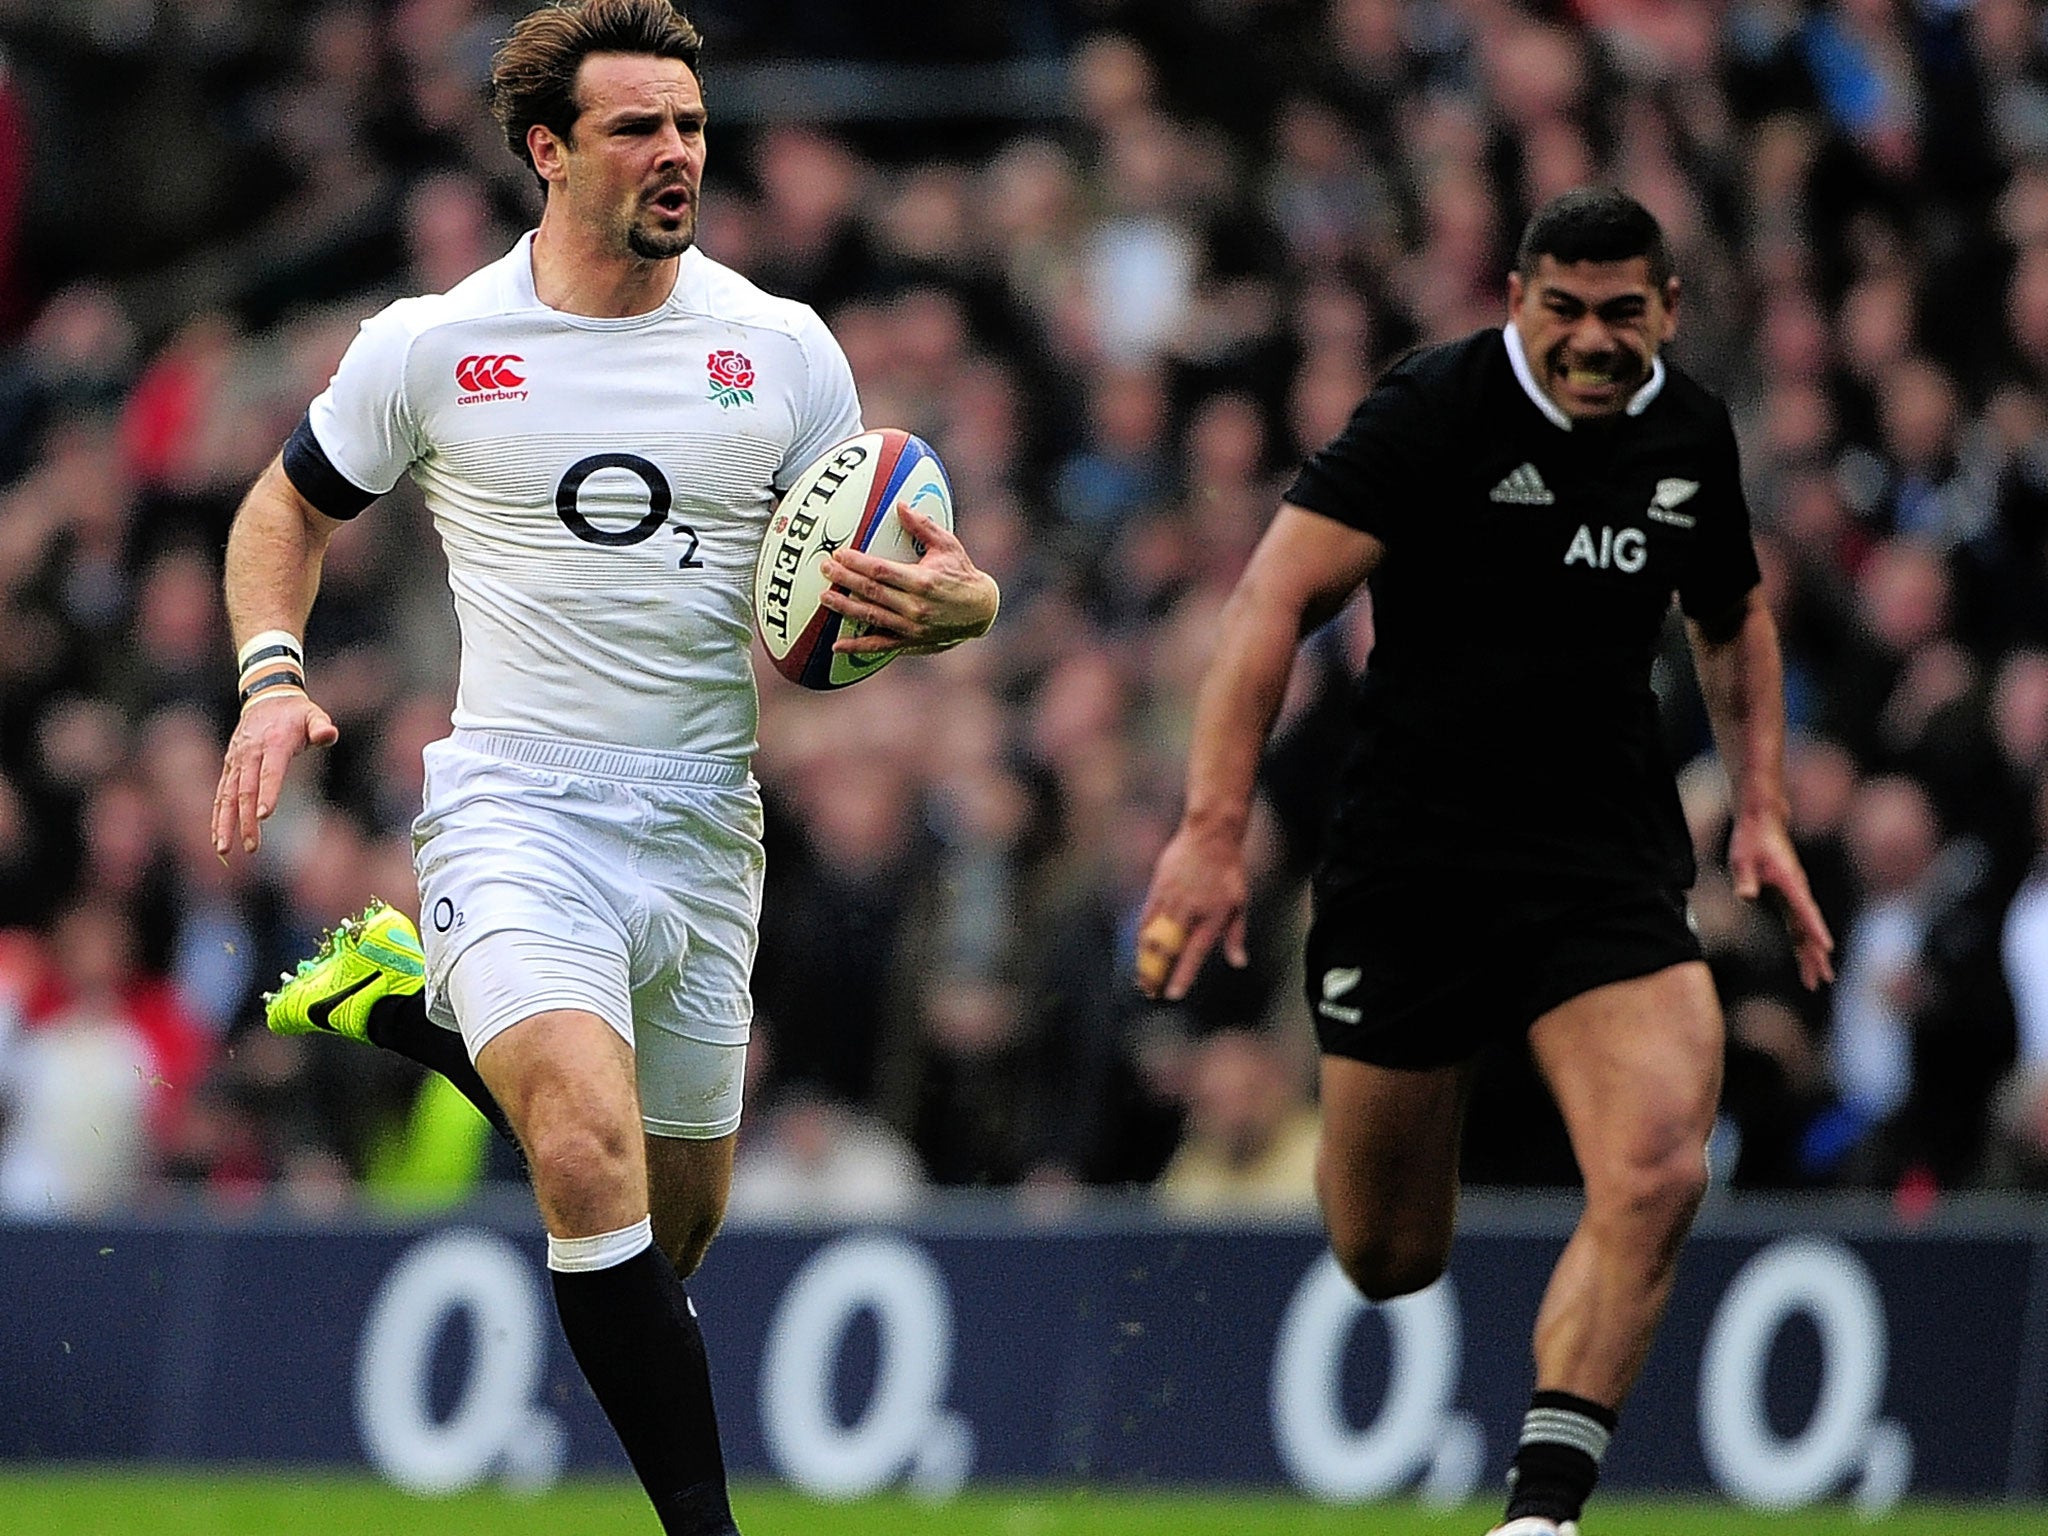 Ben Foden makes a break on his last appearance for England, against the All Blacks in November 2013